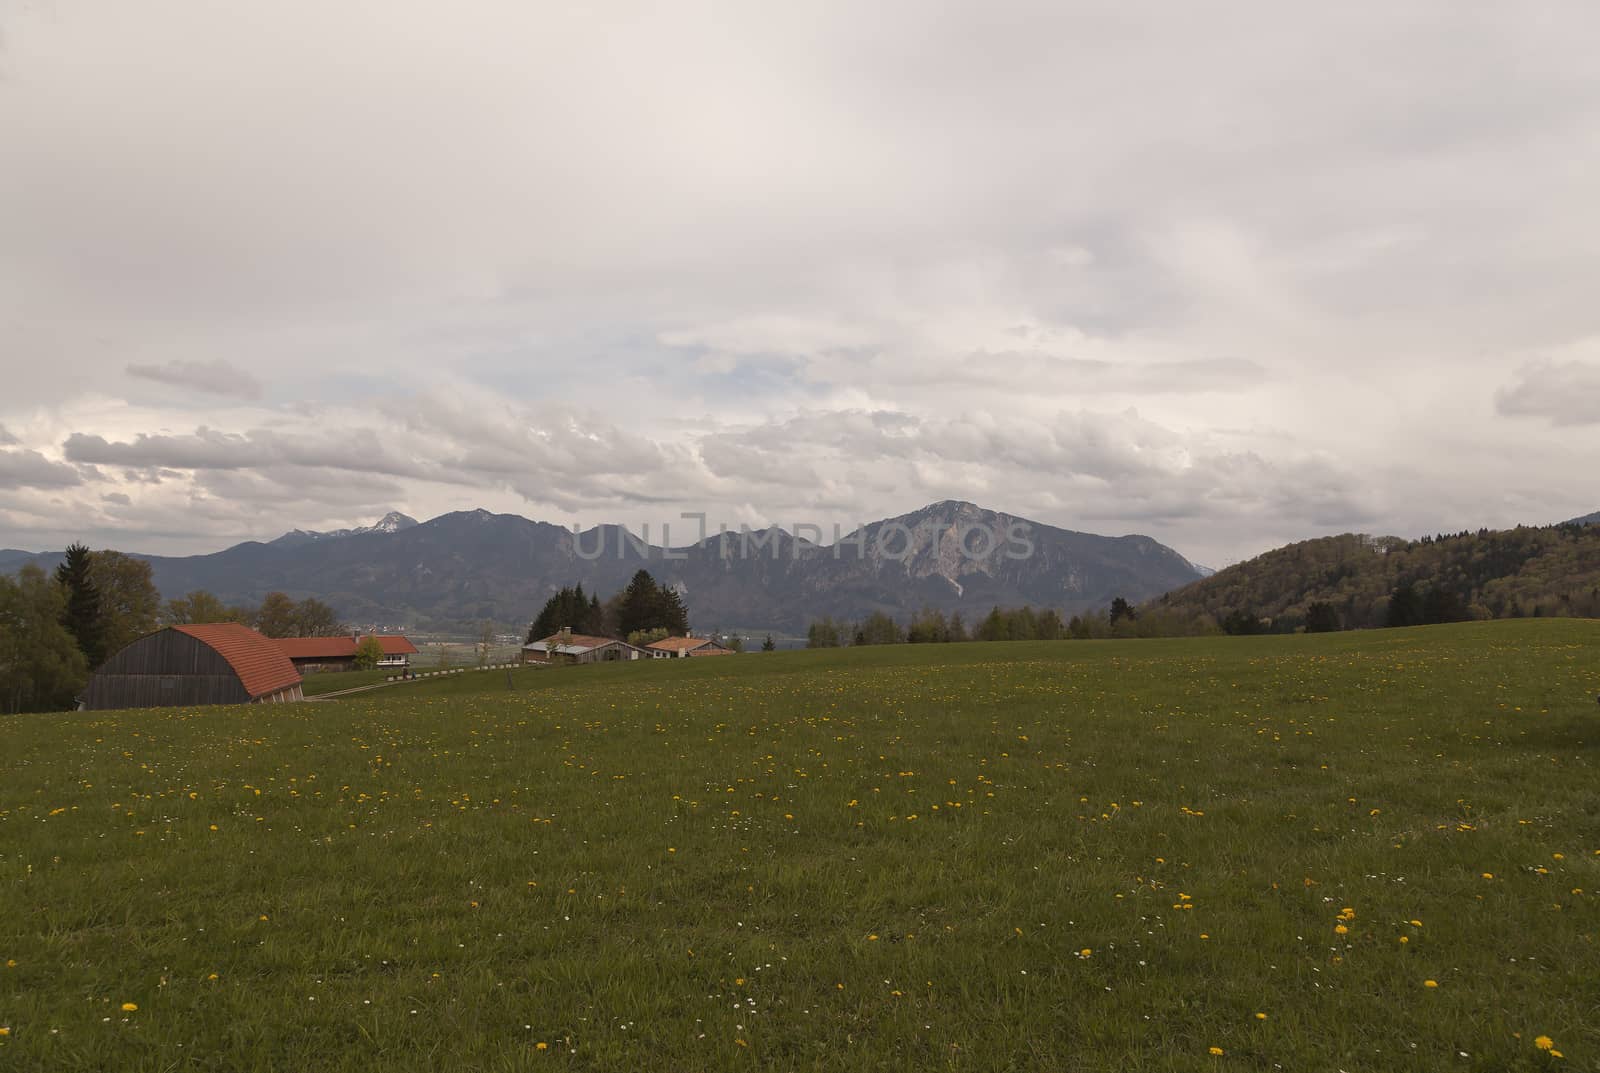 A open field with flowers and some houses and mountains in the background